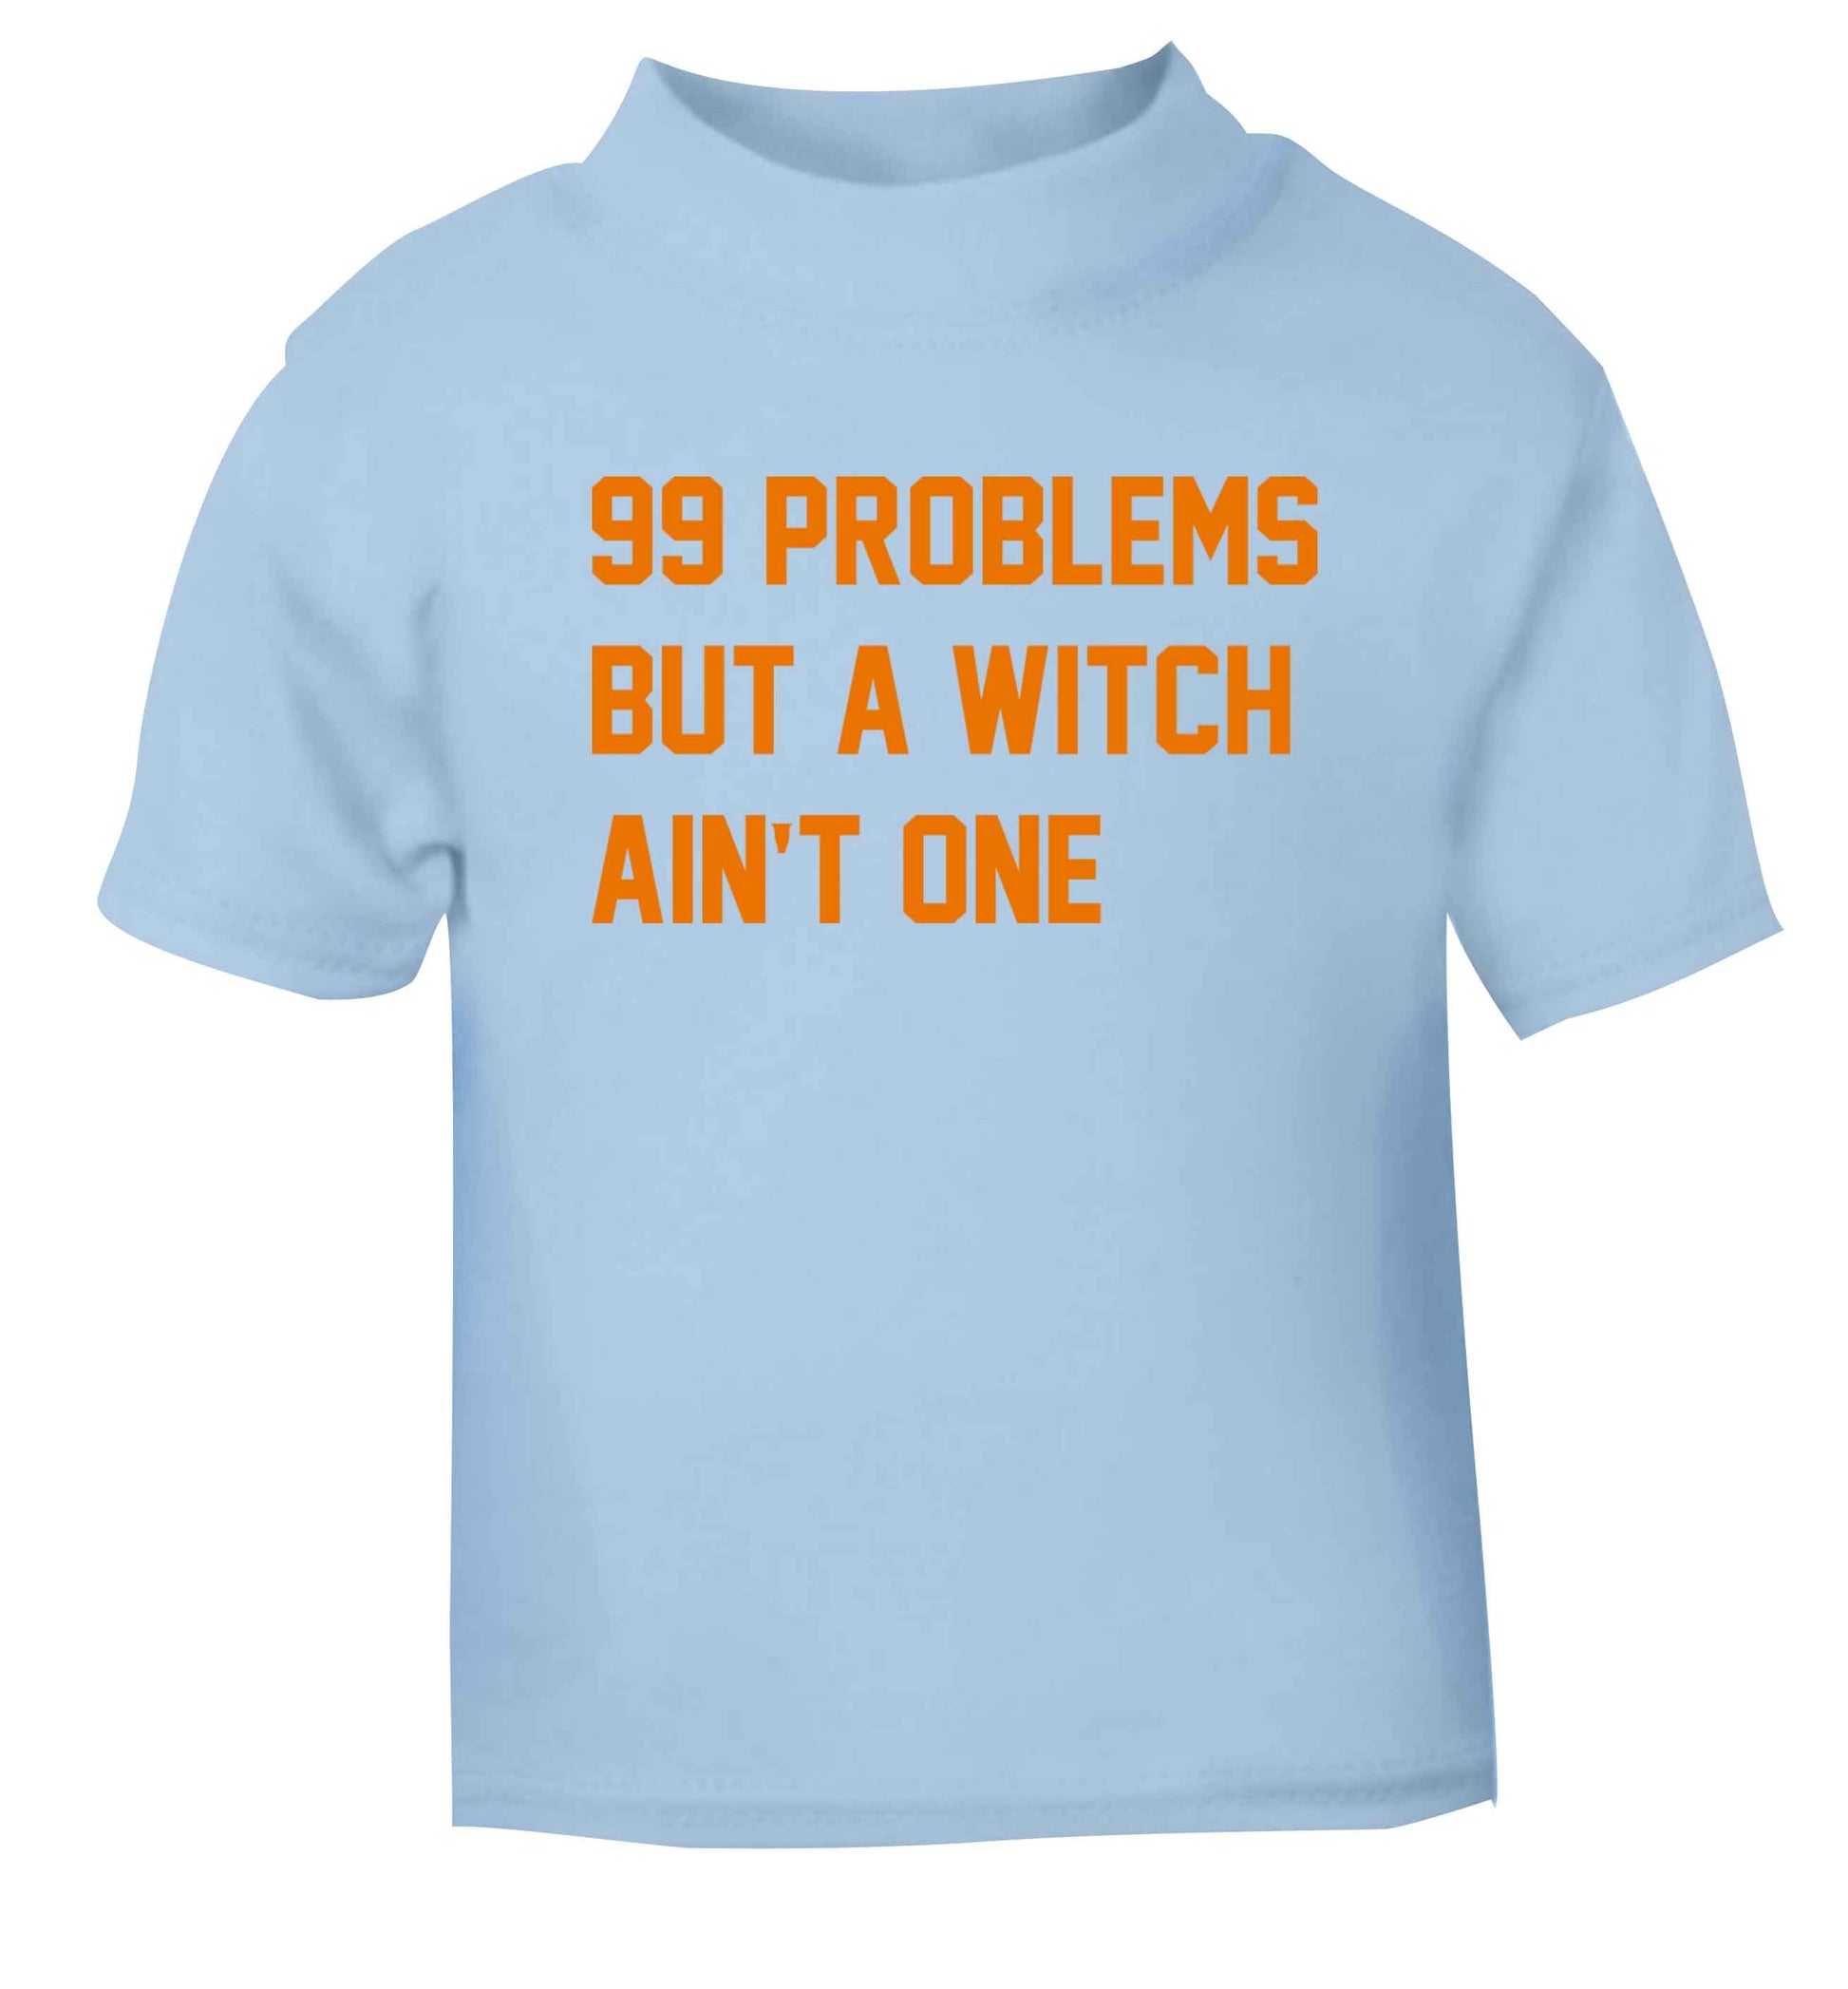 99 Problems but a witch aint one light blue baby toddler Tshirt 2 Years